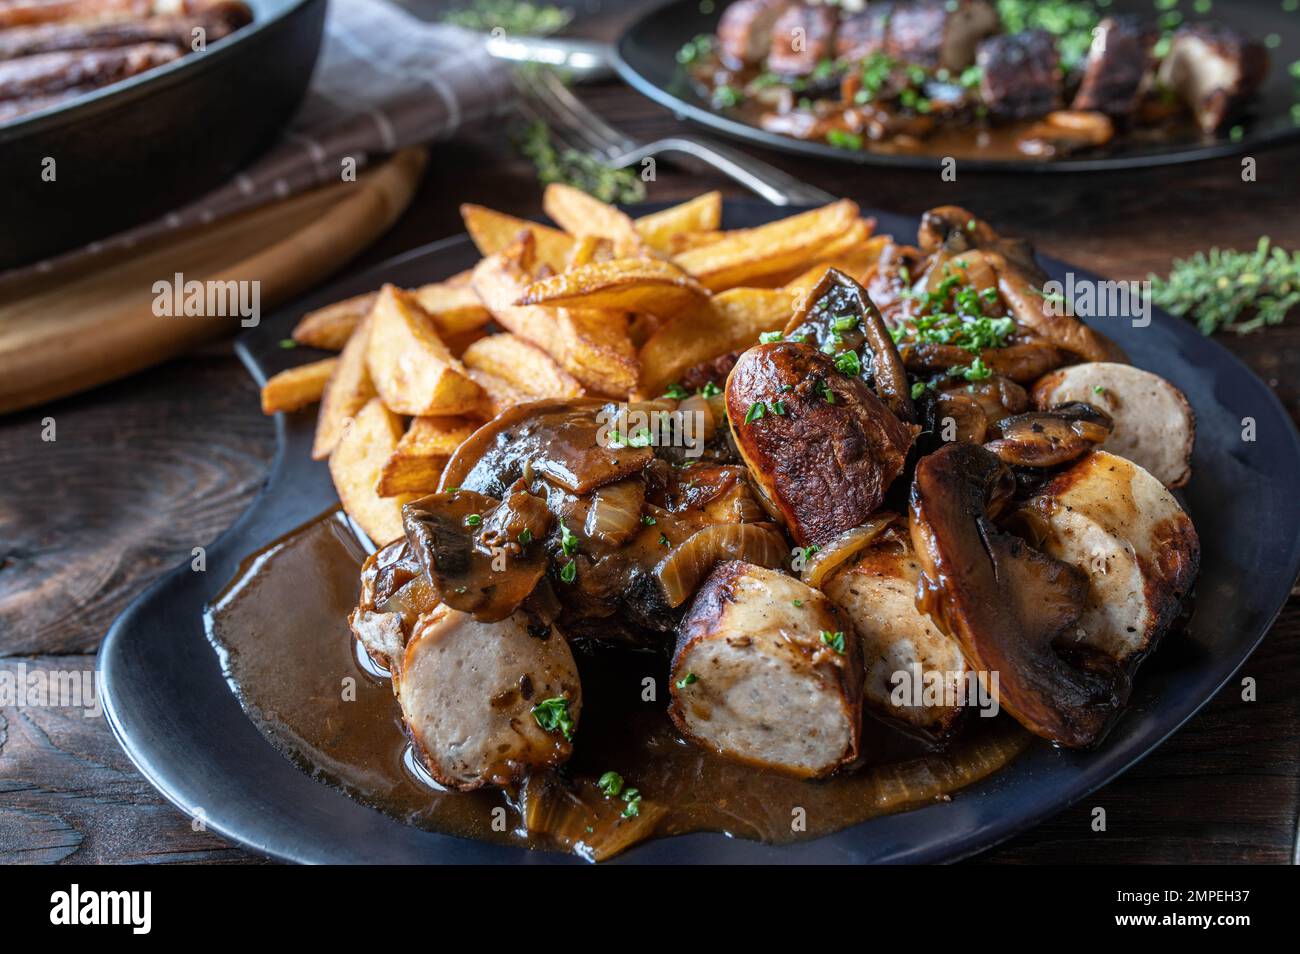 Bratwurst with brown onion, mushroom sauce and homemade french fries on wooden table. Stock Photo